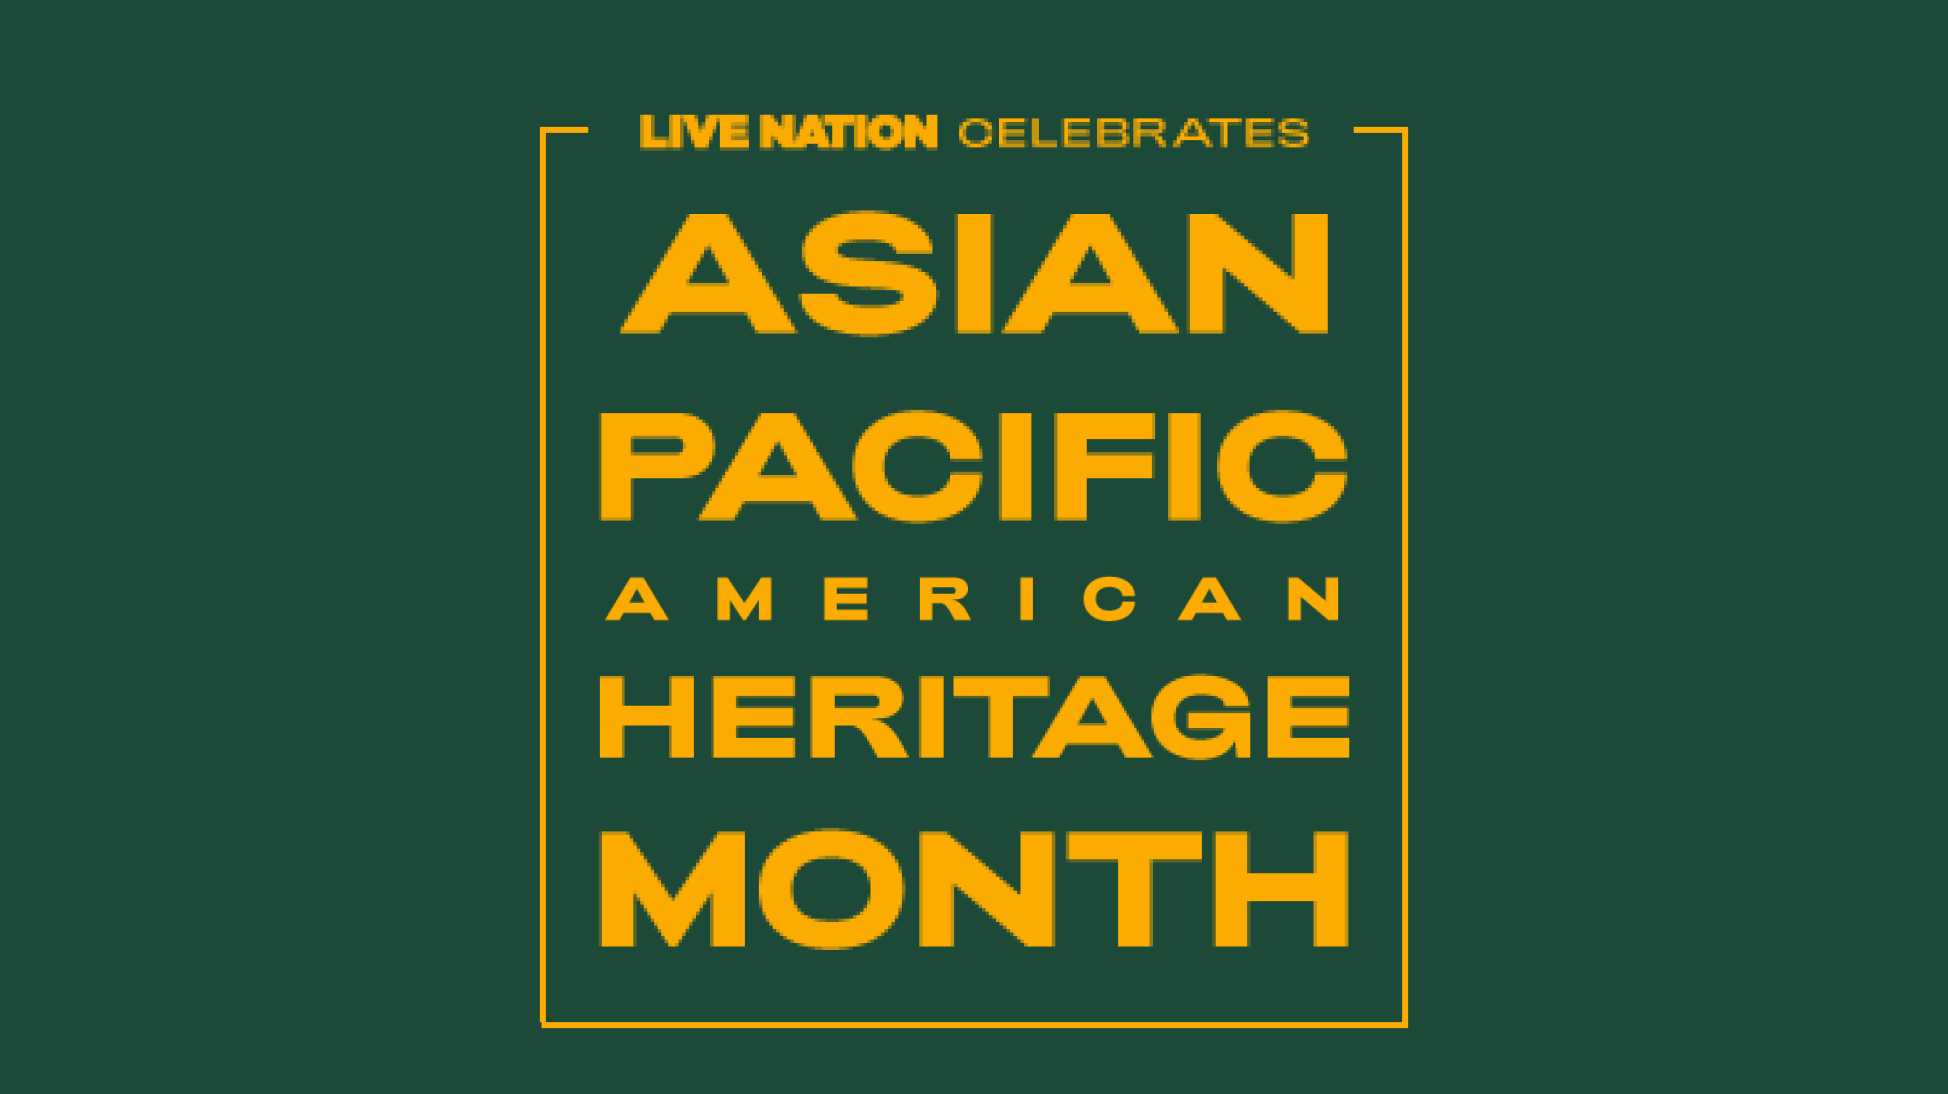 asian pacific America heritage month logo with live nation